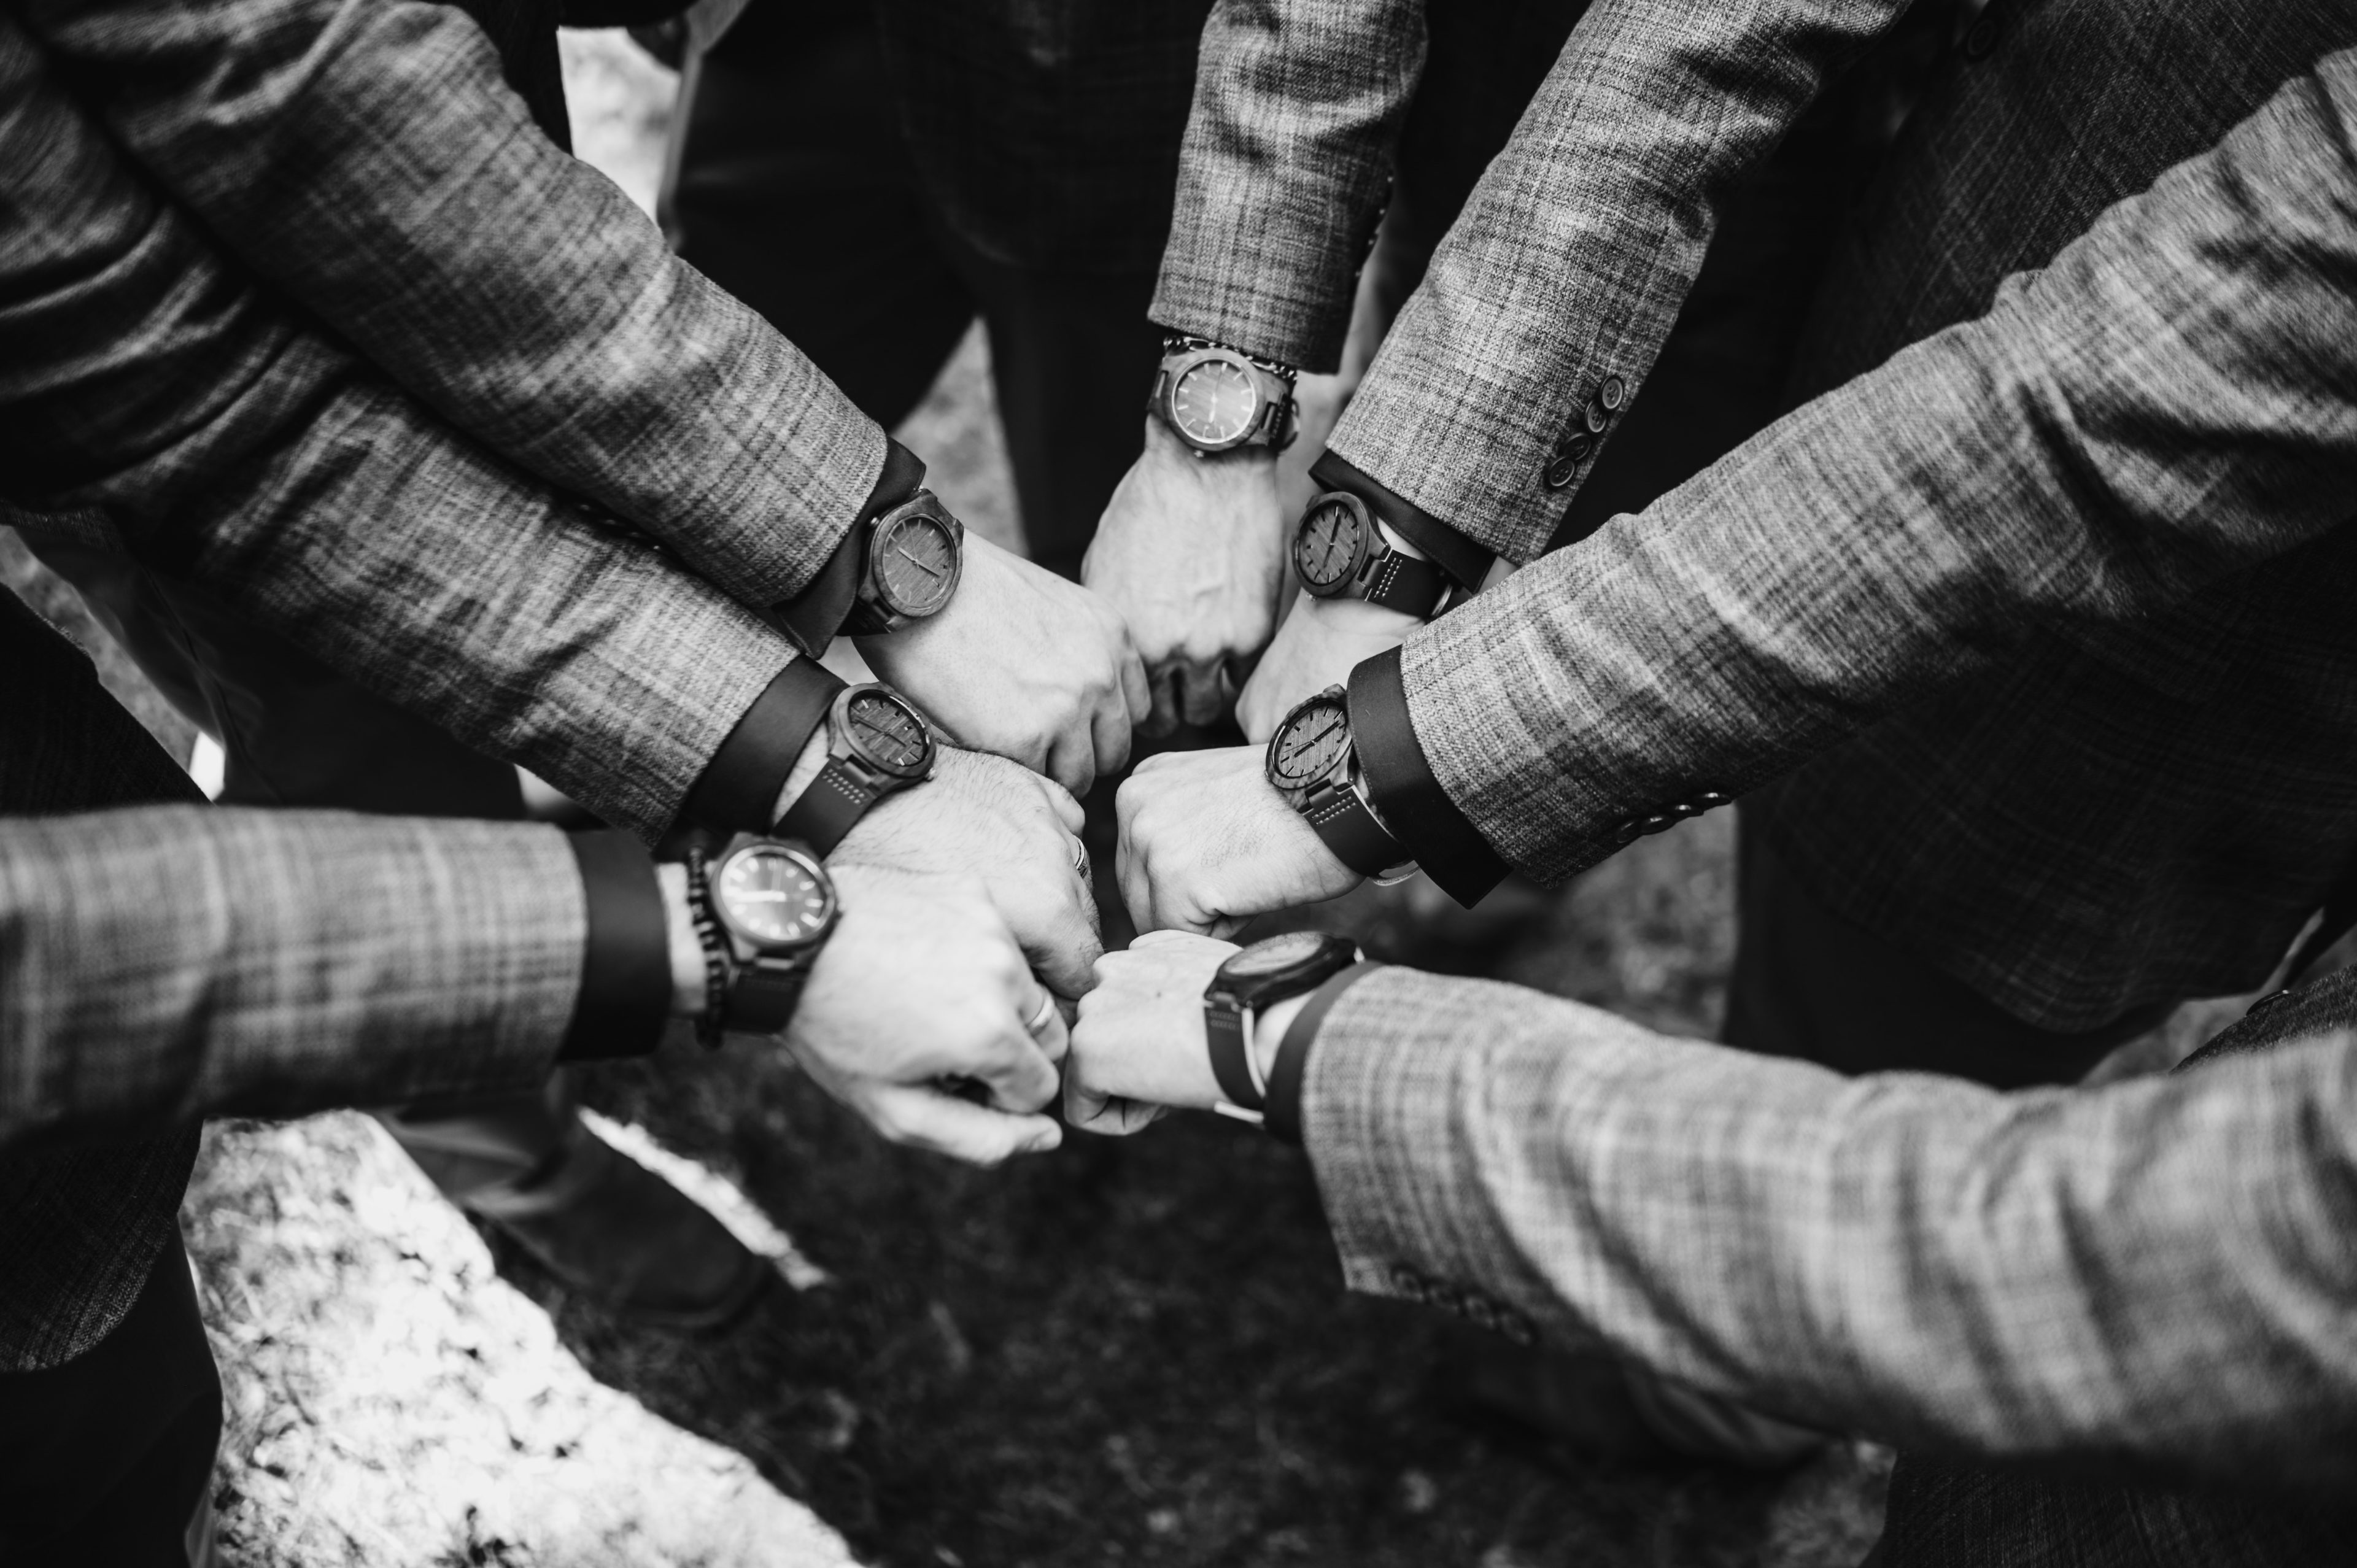 Groomsmen show off their matching watches in a circle